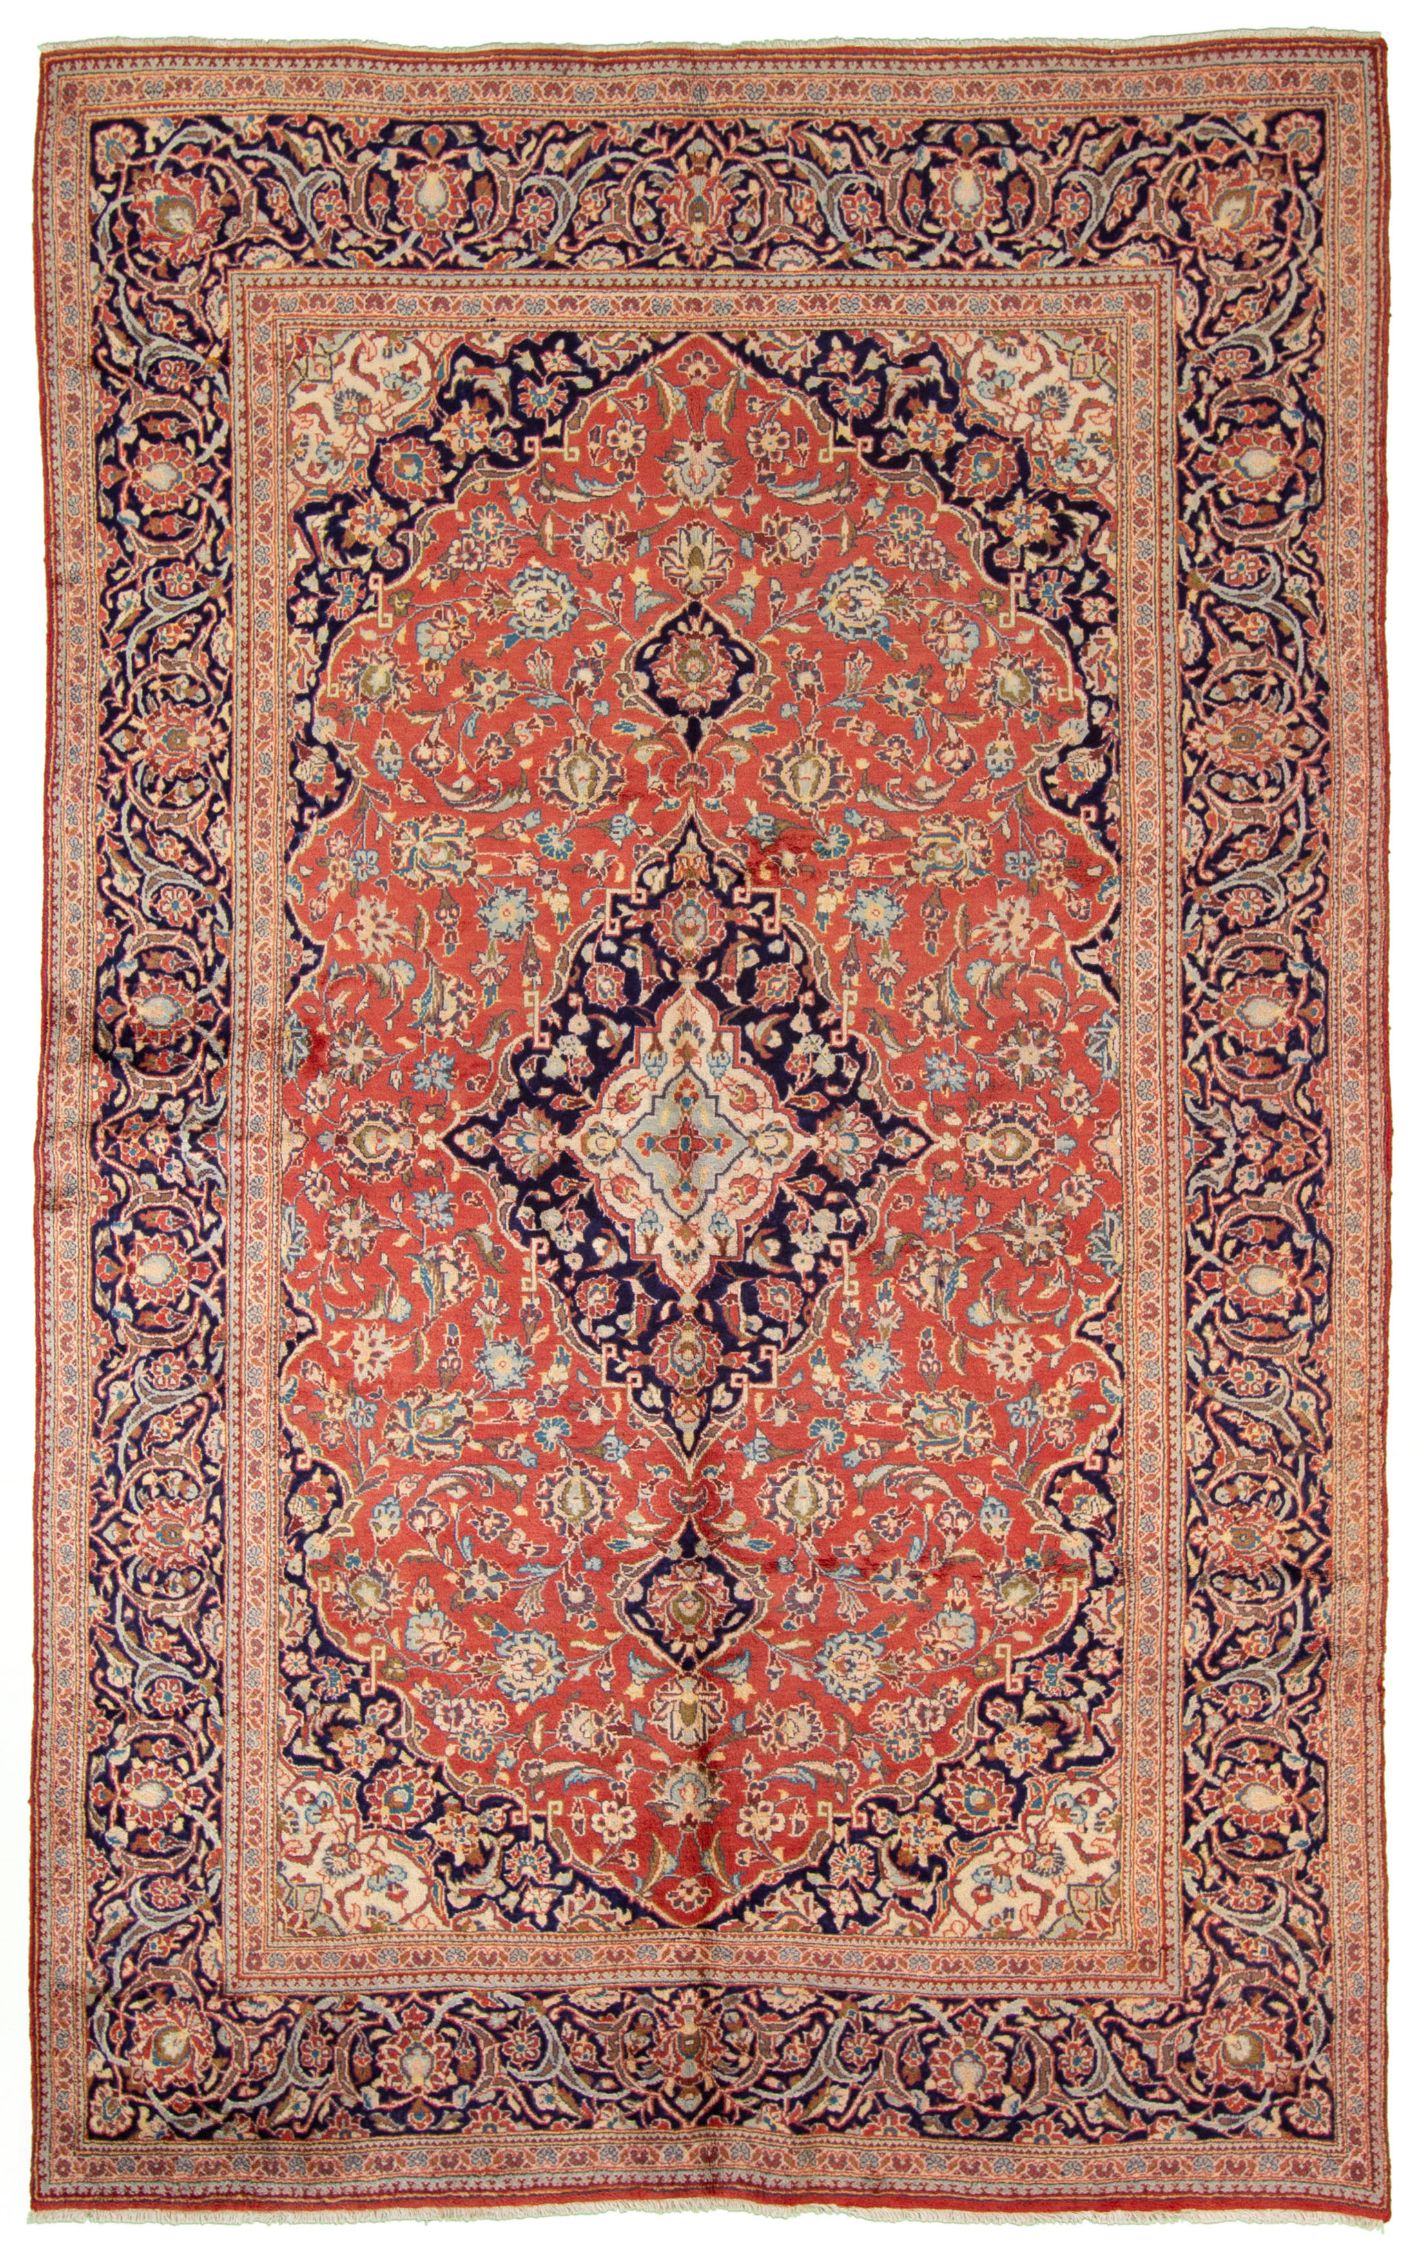 Hand-knotted Kashan  Wool Rug 6'5" x 10'2" Size: 6'5" x 10'2"  